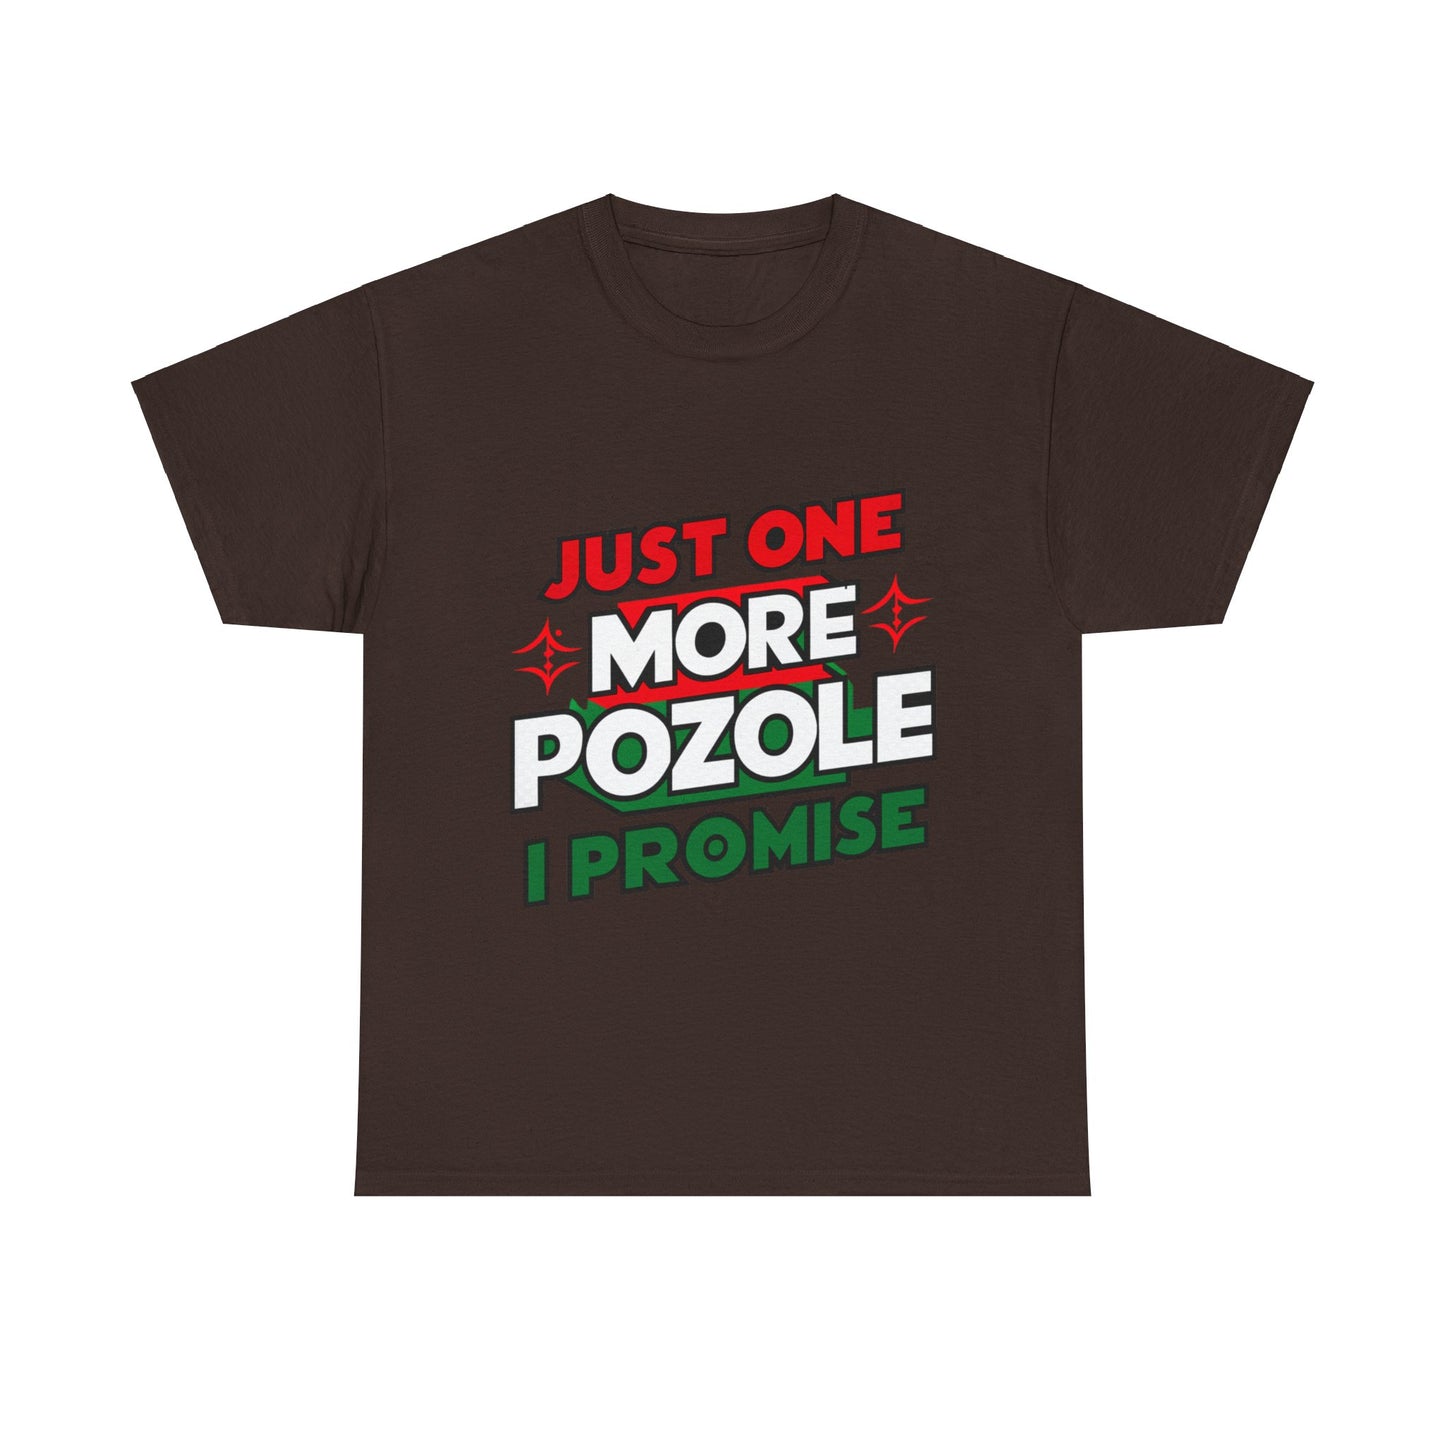 Just One More Pozole I Promise Mexican Food Graphic Unisex Heavy Cotton Tee Cotton Funny Humorous Graphic Soft Premium Unisex Men Women Dark Chocolate T-shirt Birthday Gift-3